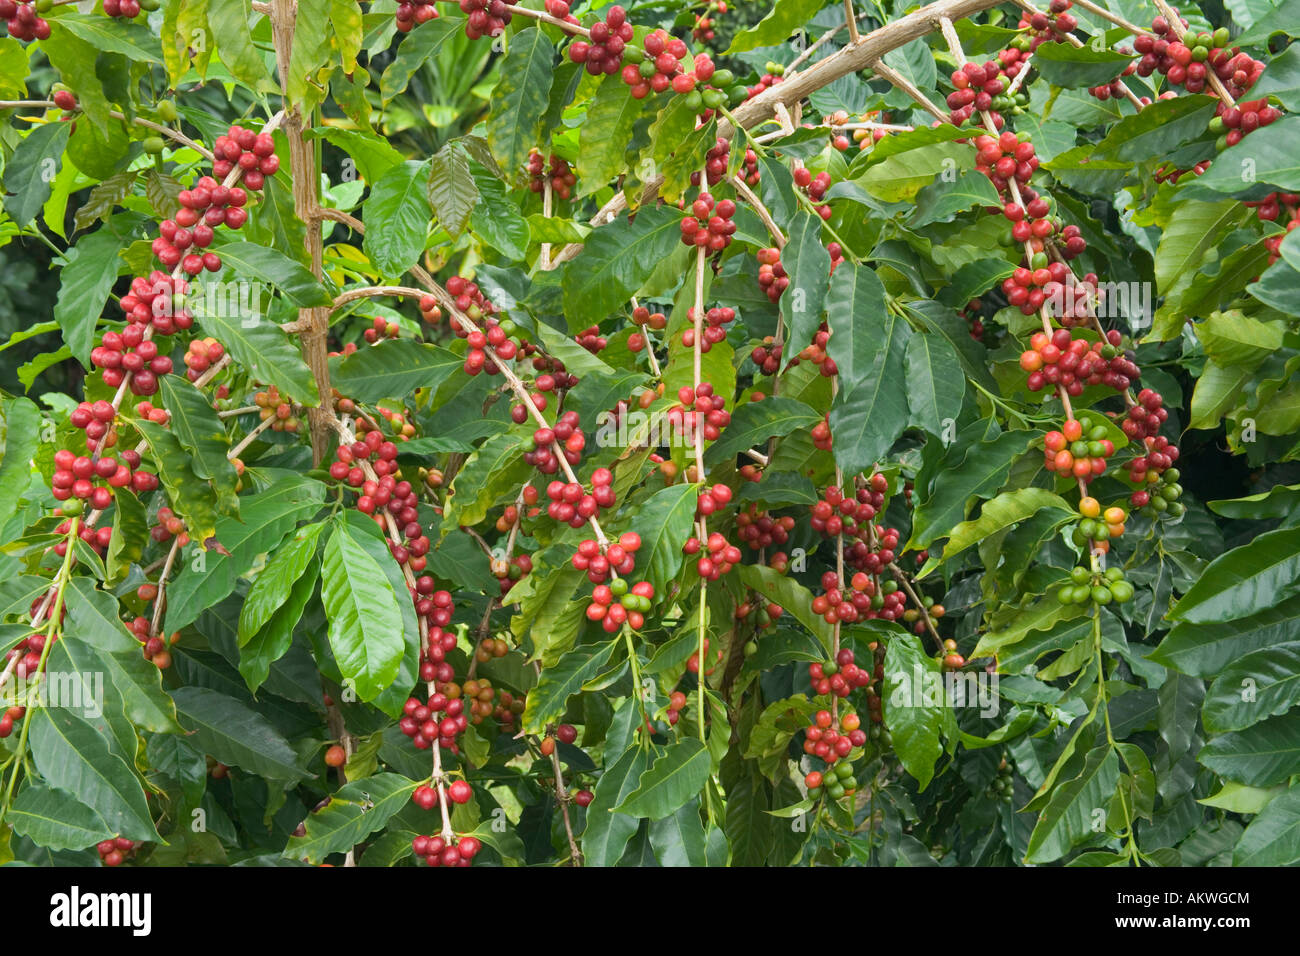 Mature Kona coffee beans on branches. Stock Photo